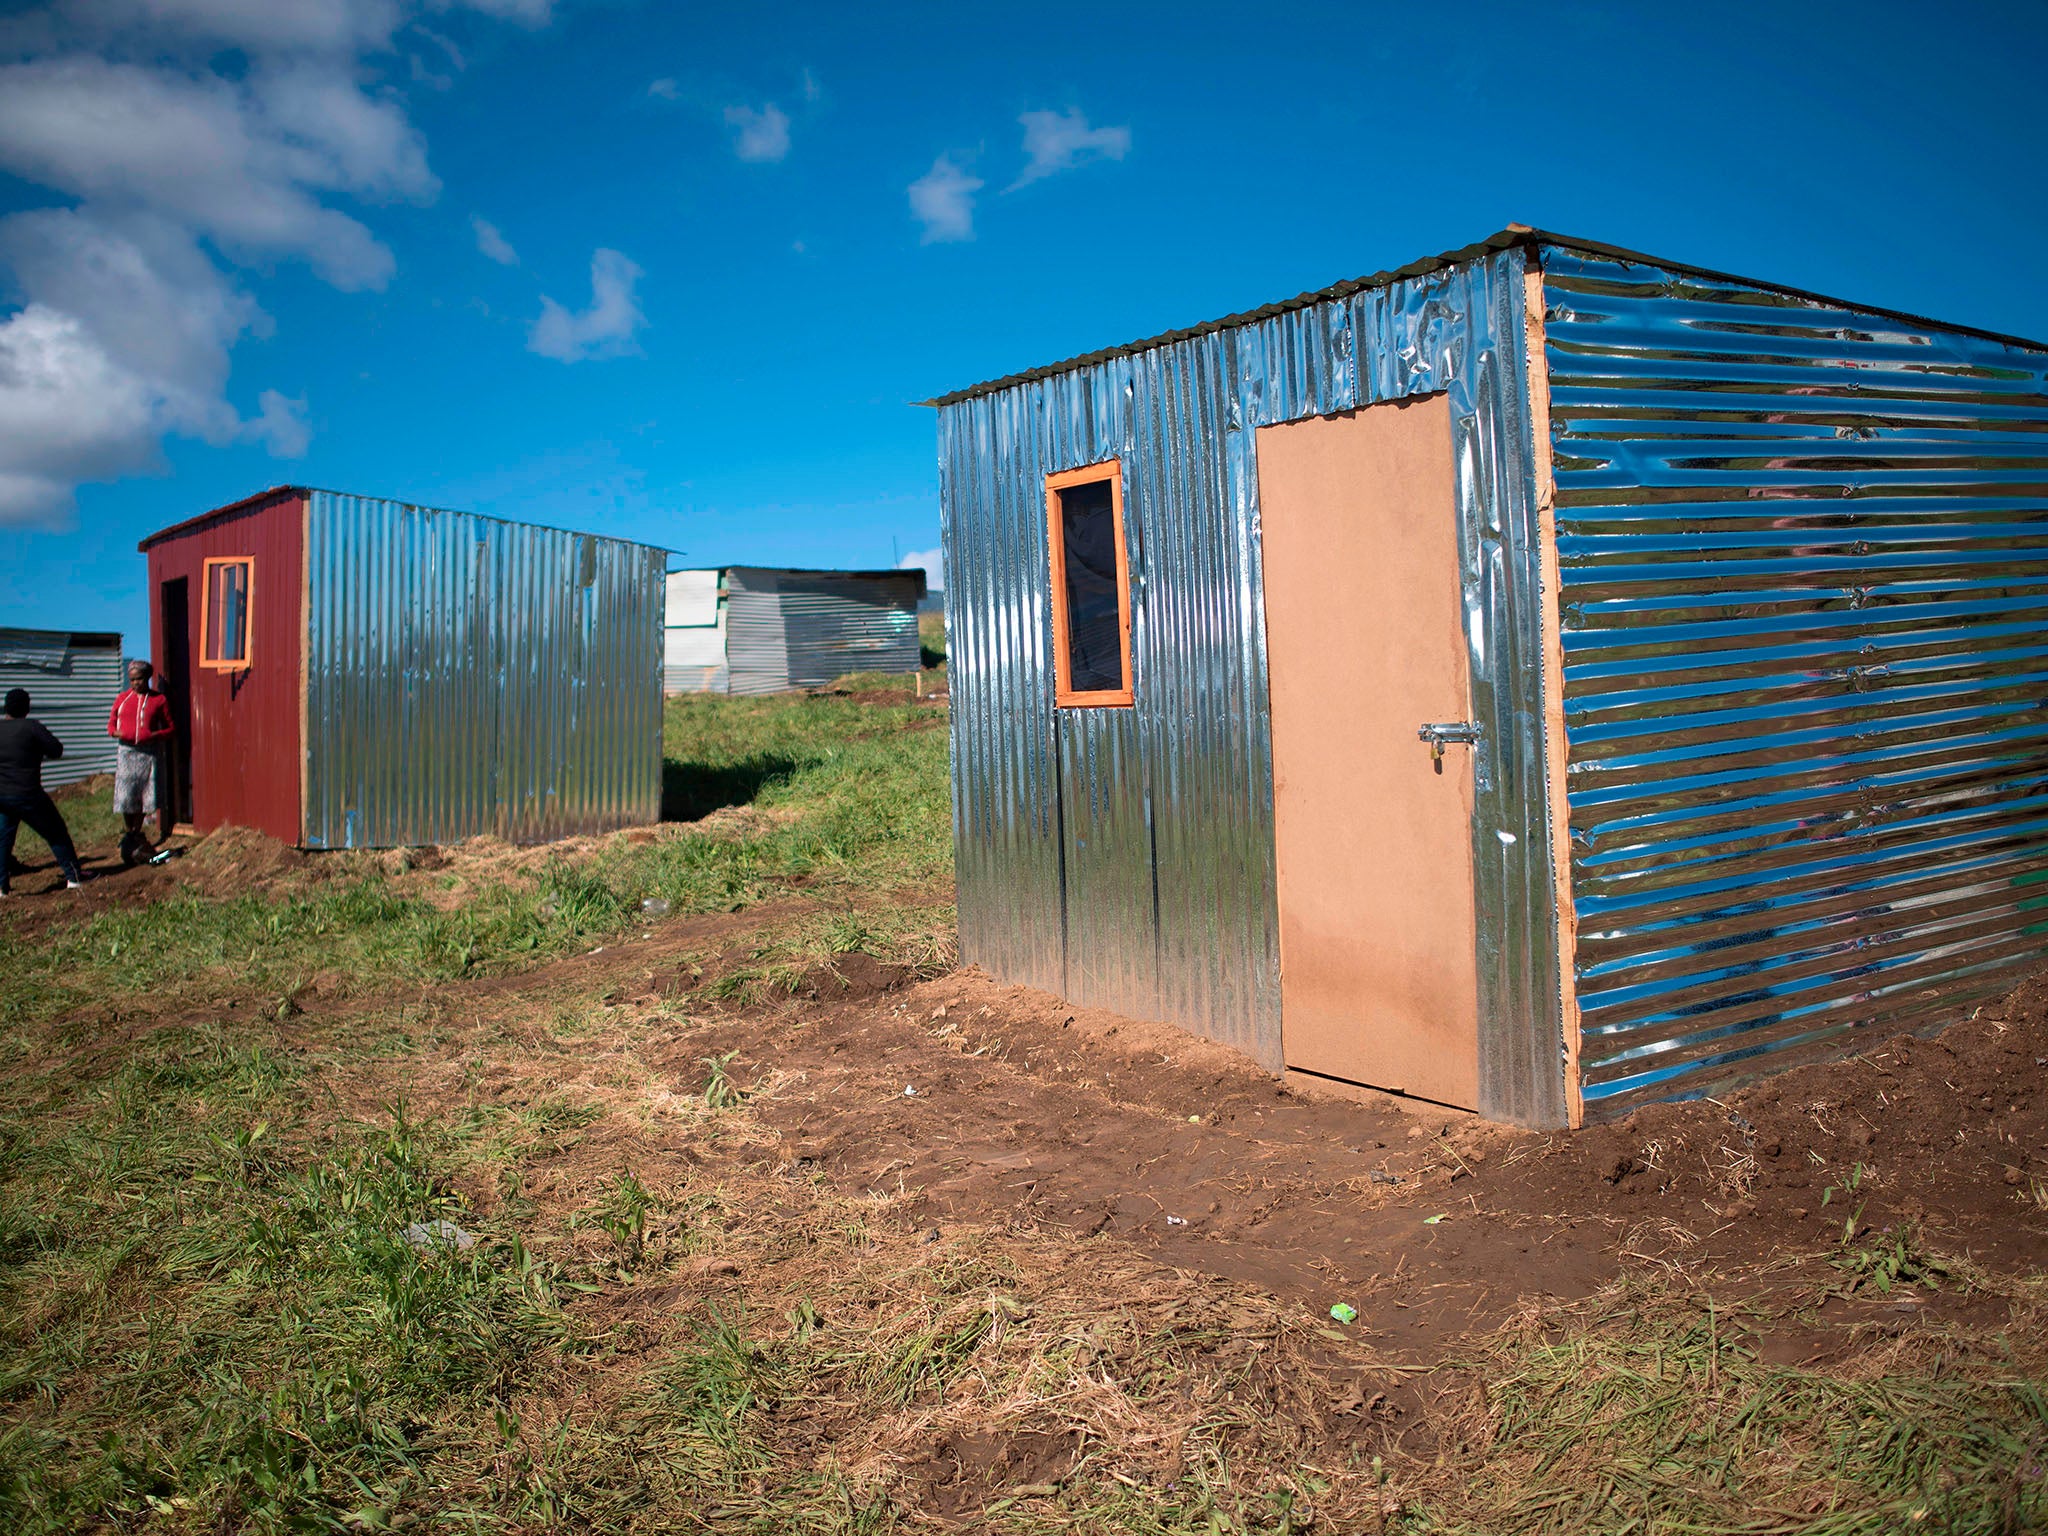 Hundreds of shacks have been erected on the property, which is next to the Kayamandi informal settlelment